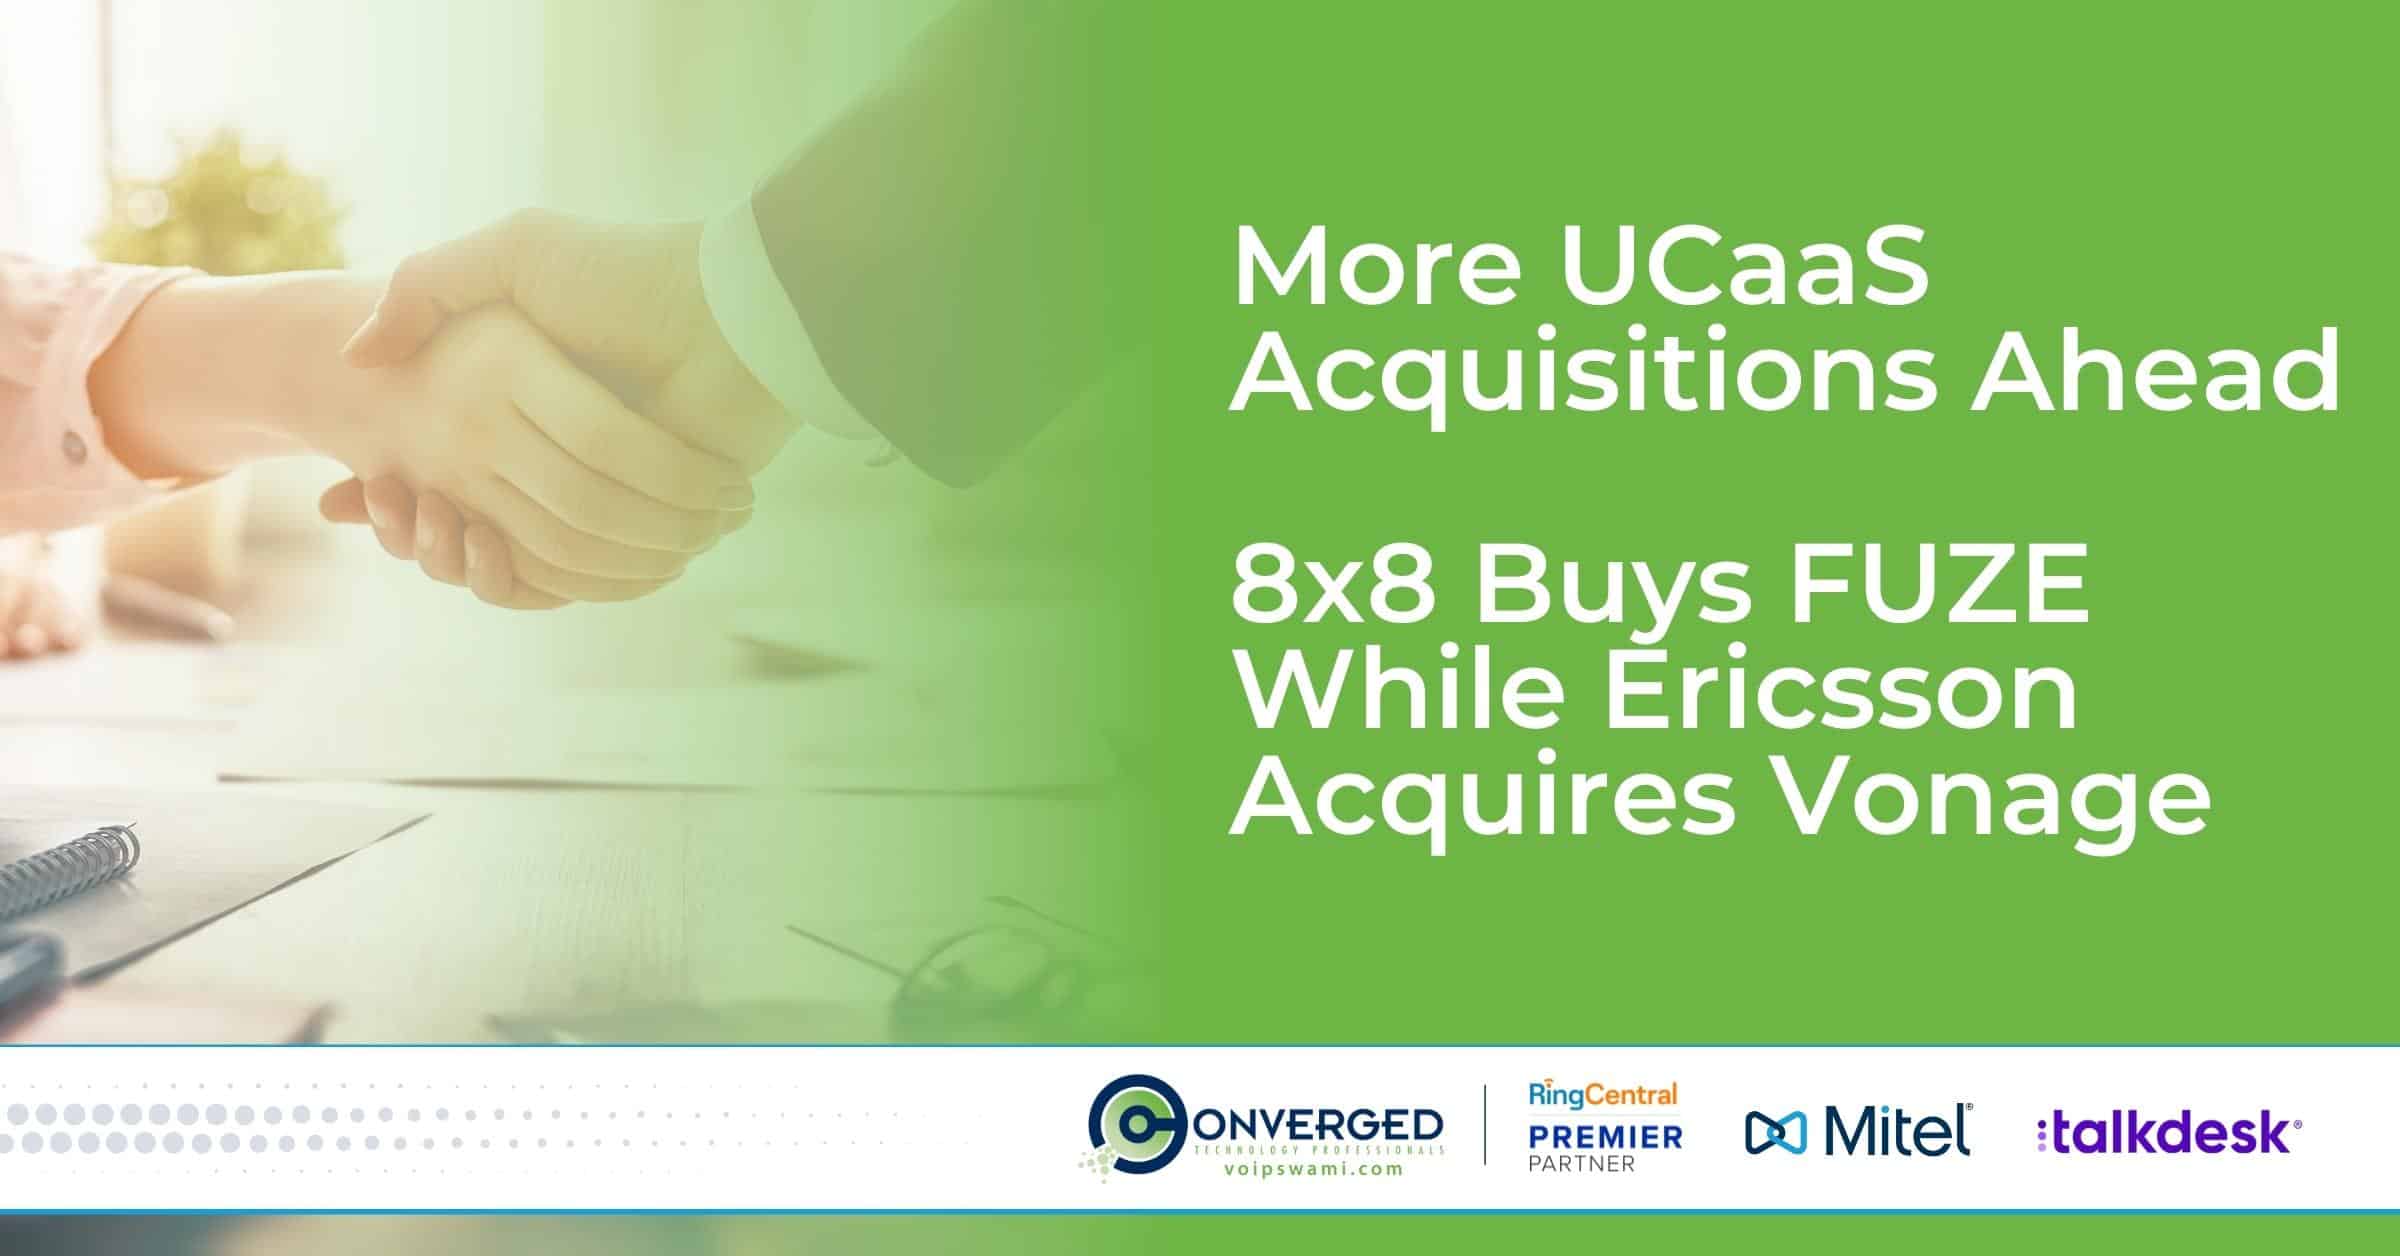 More UCaaS Acquisitions Ahead- 8x8 Buys FUZE While Ericsson Acquires Vonage